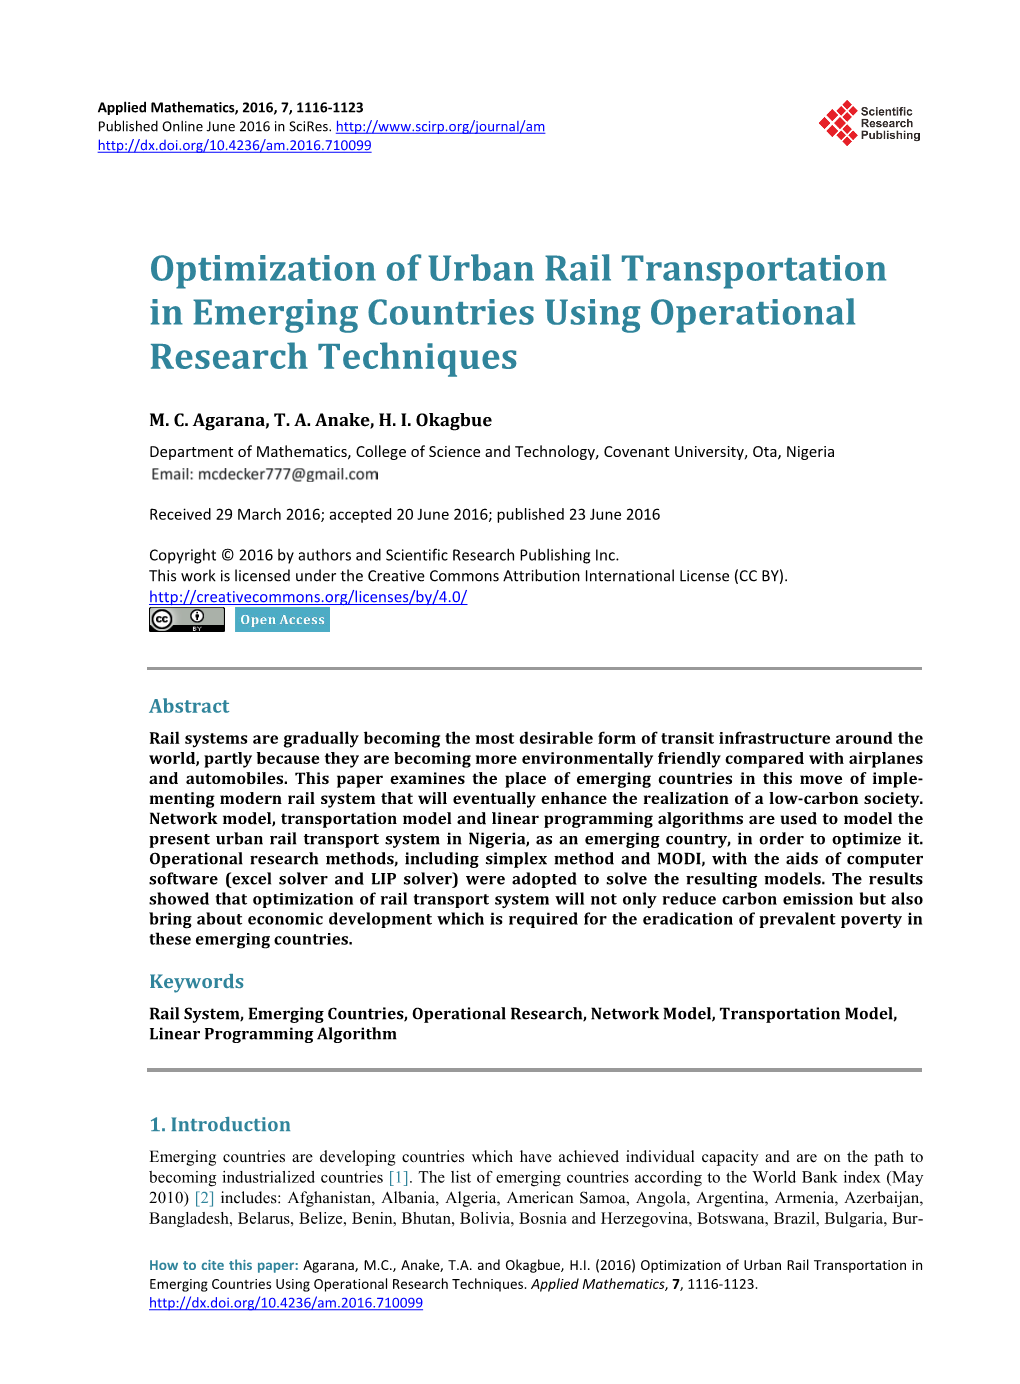 Optimization of Urban Rail Transportation in Emerging Countries Using Operational Research Techniques